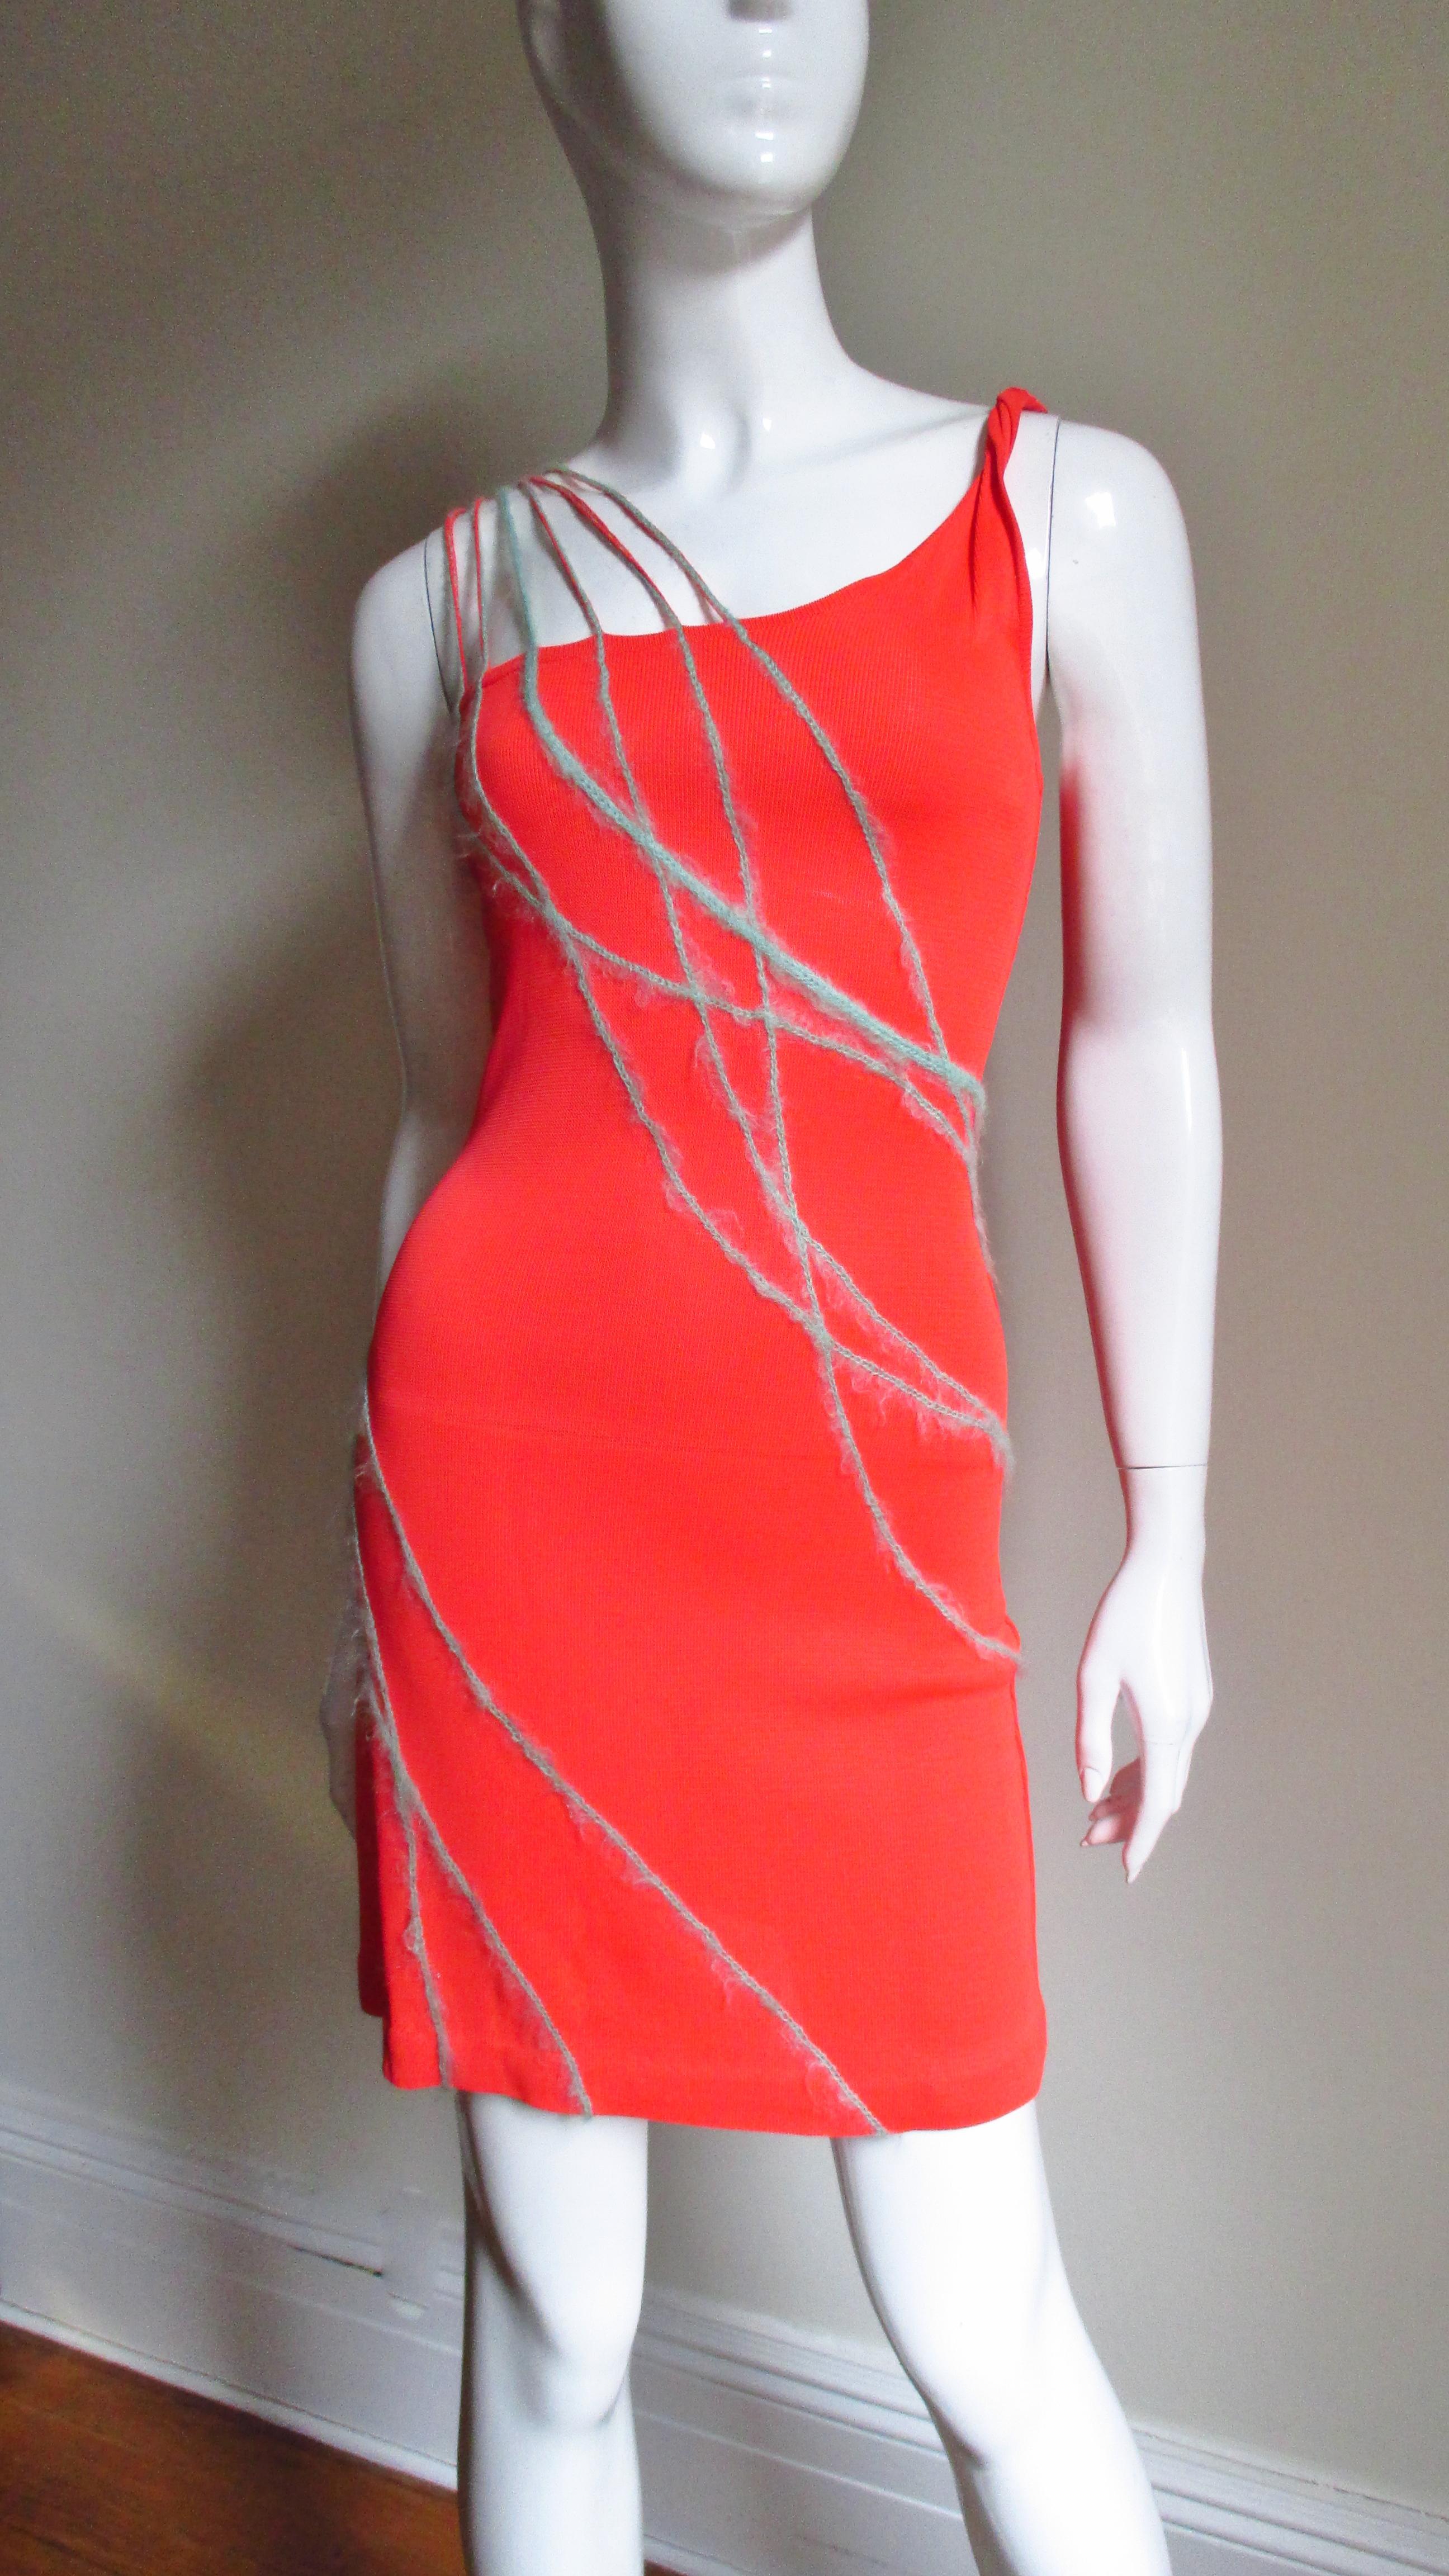 A fabulous orange one shoulder silk knit dress by Gianni Versace Couture.  The dress is highlighted with lines of light blue angora yarn over the one shoulder which extend down the front wrapping around at the dress.  It slips on over the head and